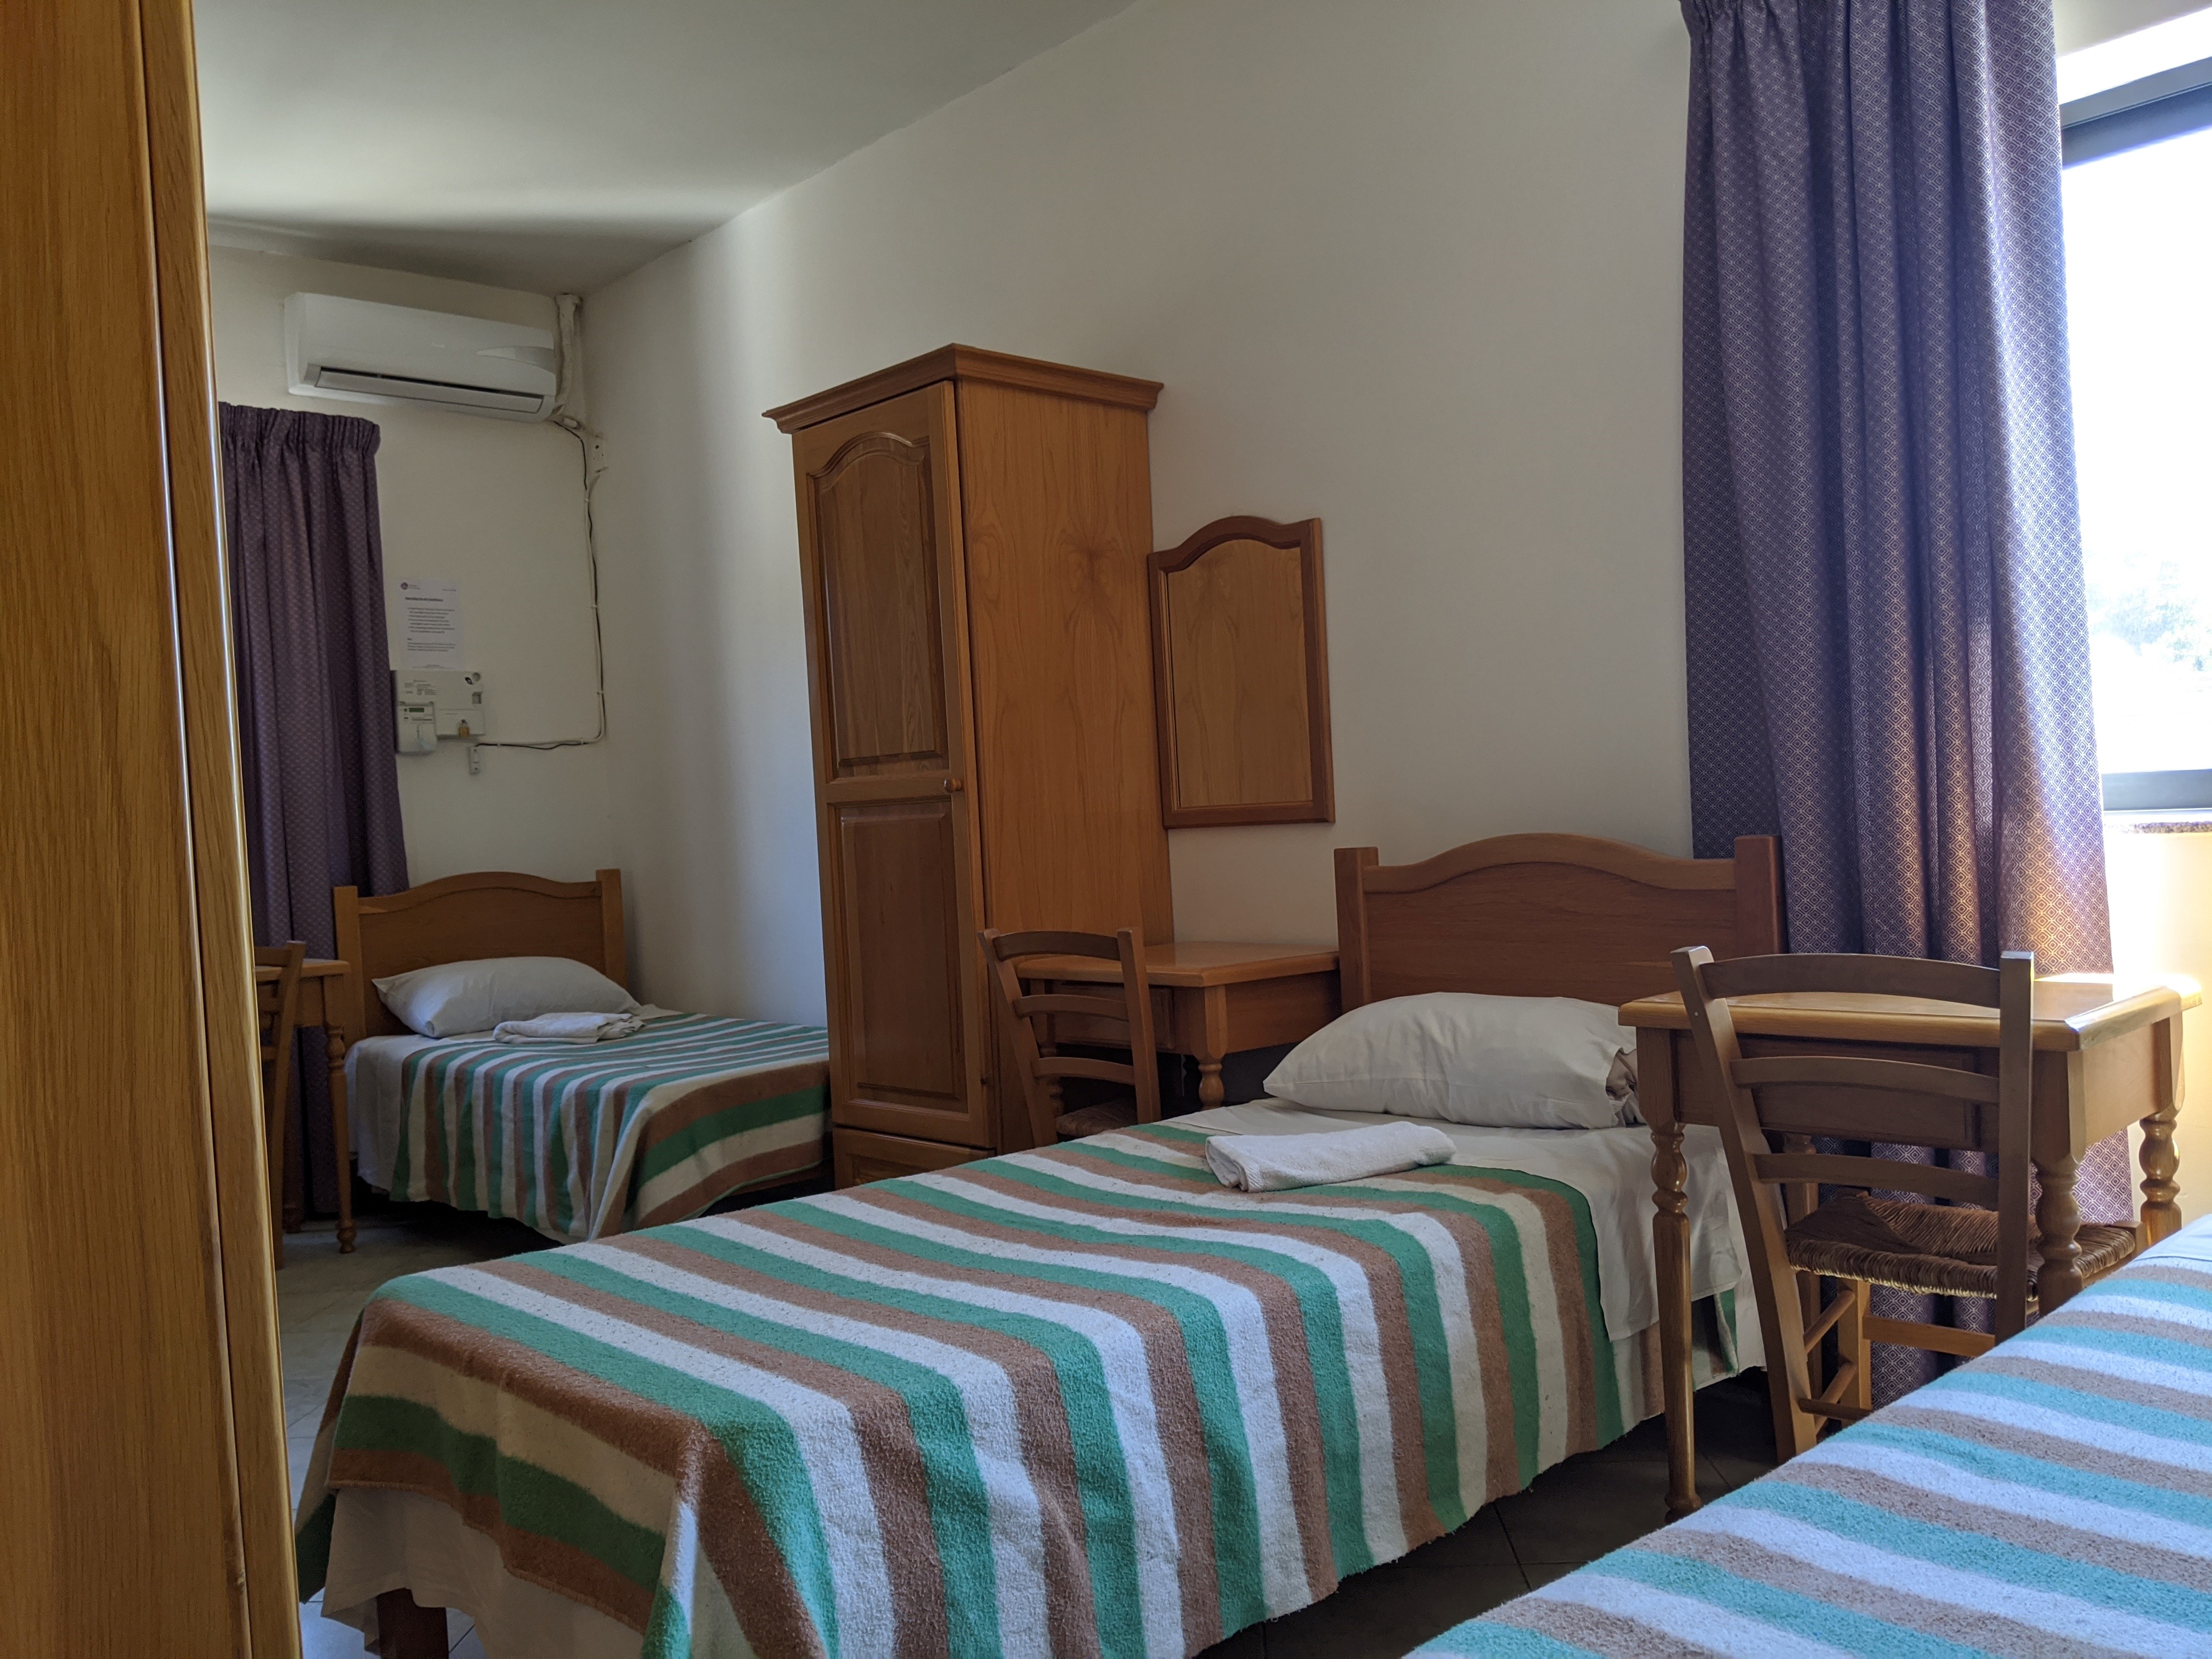 Study English in Malta - GSE Residence bedrooms next to school quadruple or family room